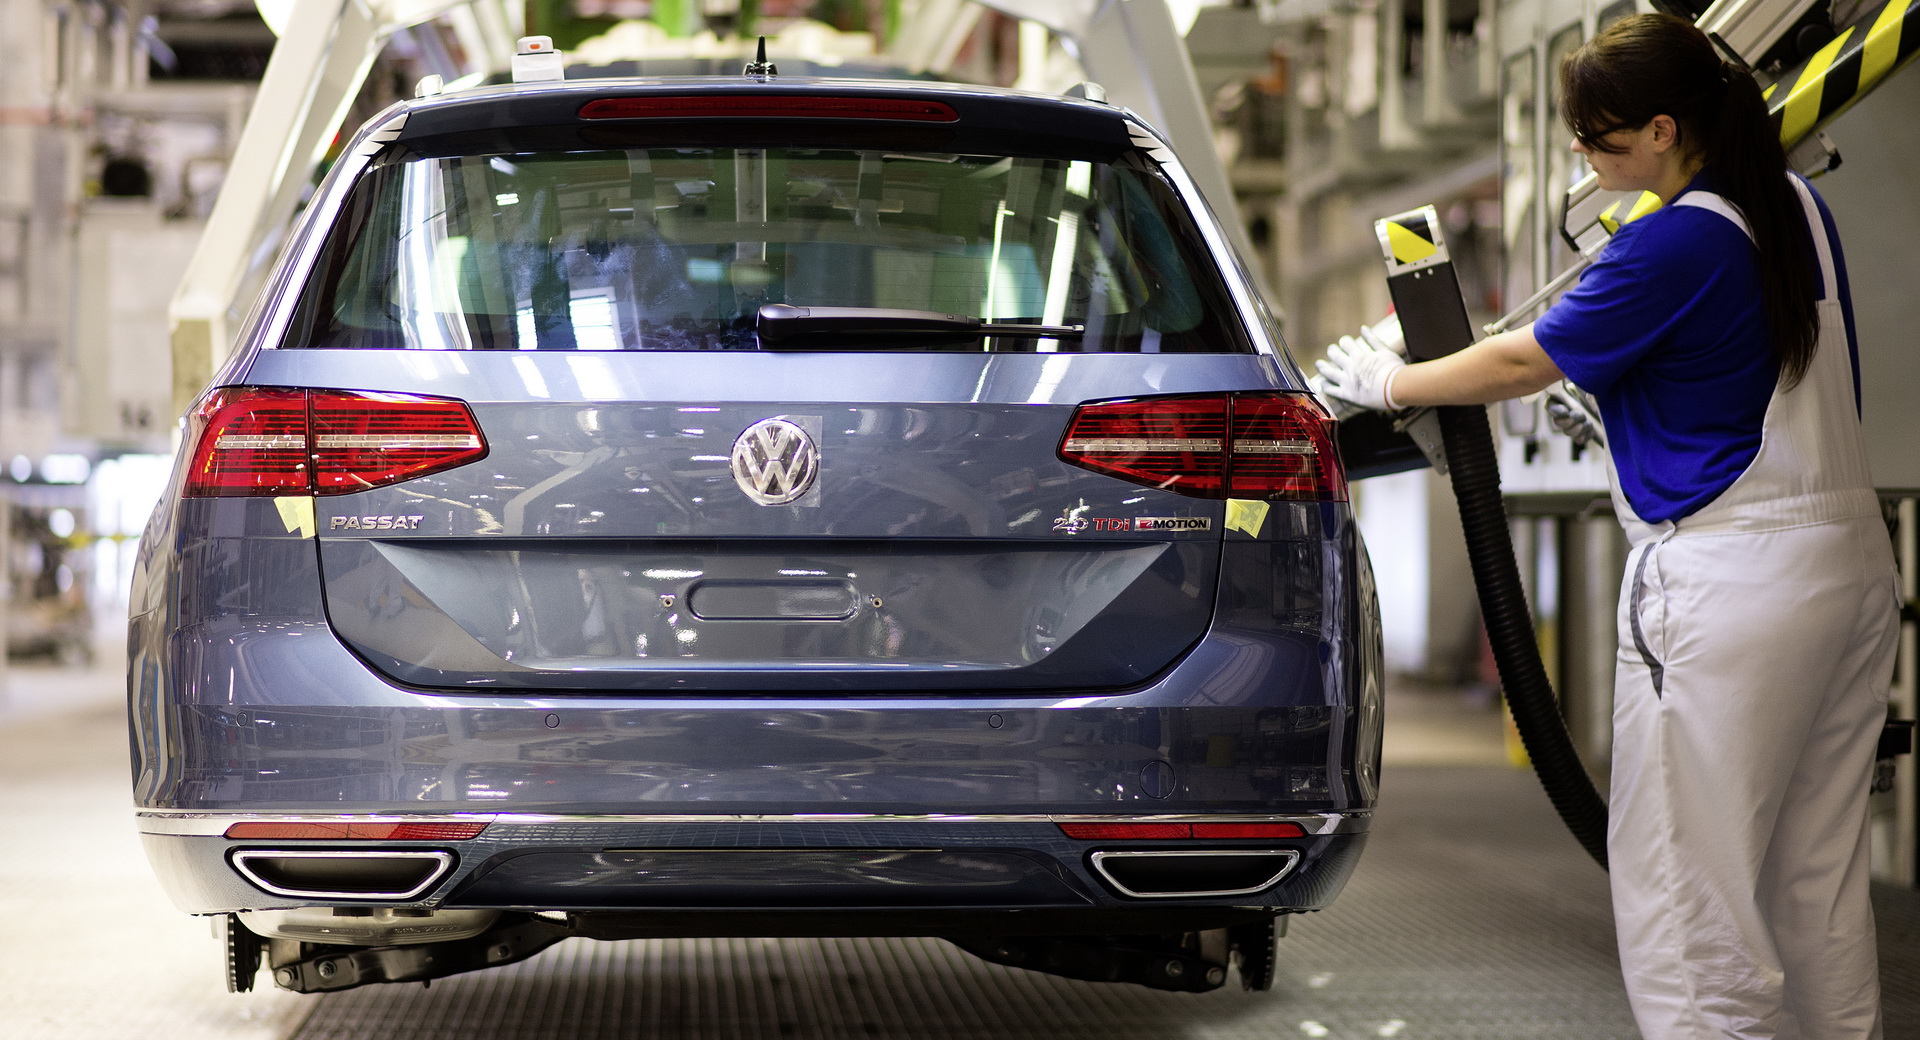 VW's Labor Unions Determined To Block Decision On New Plant In